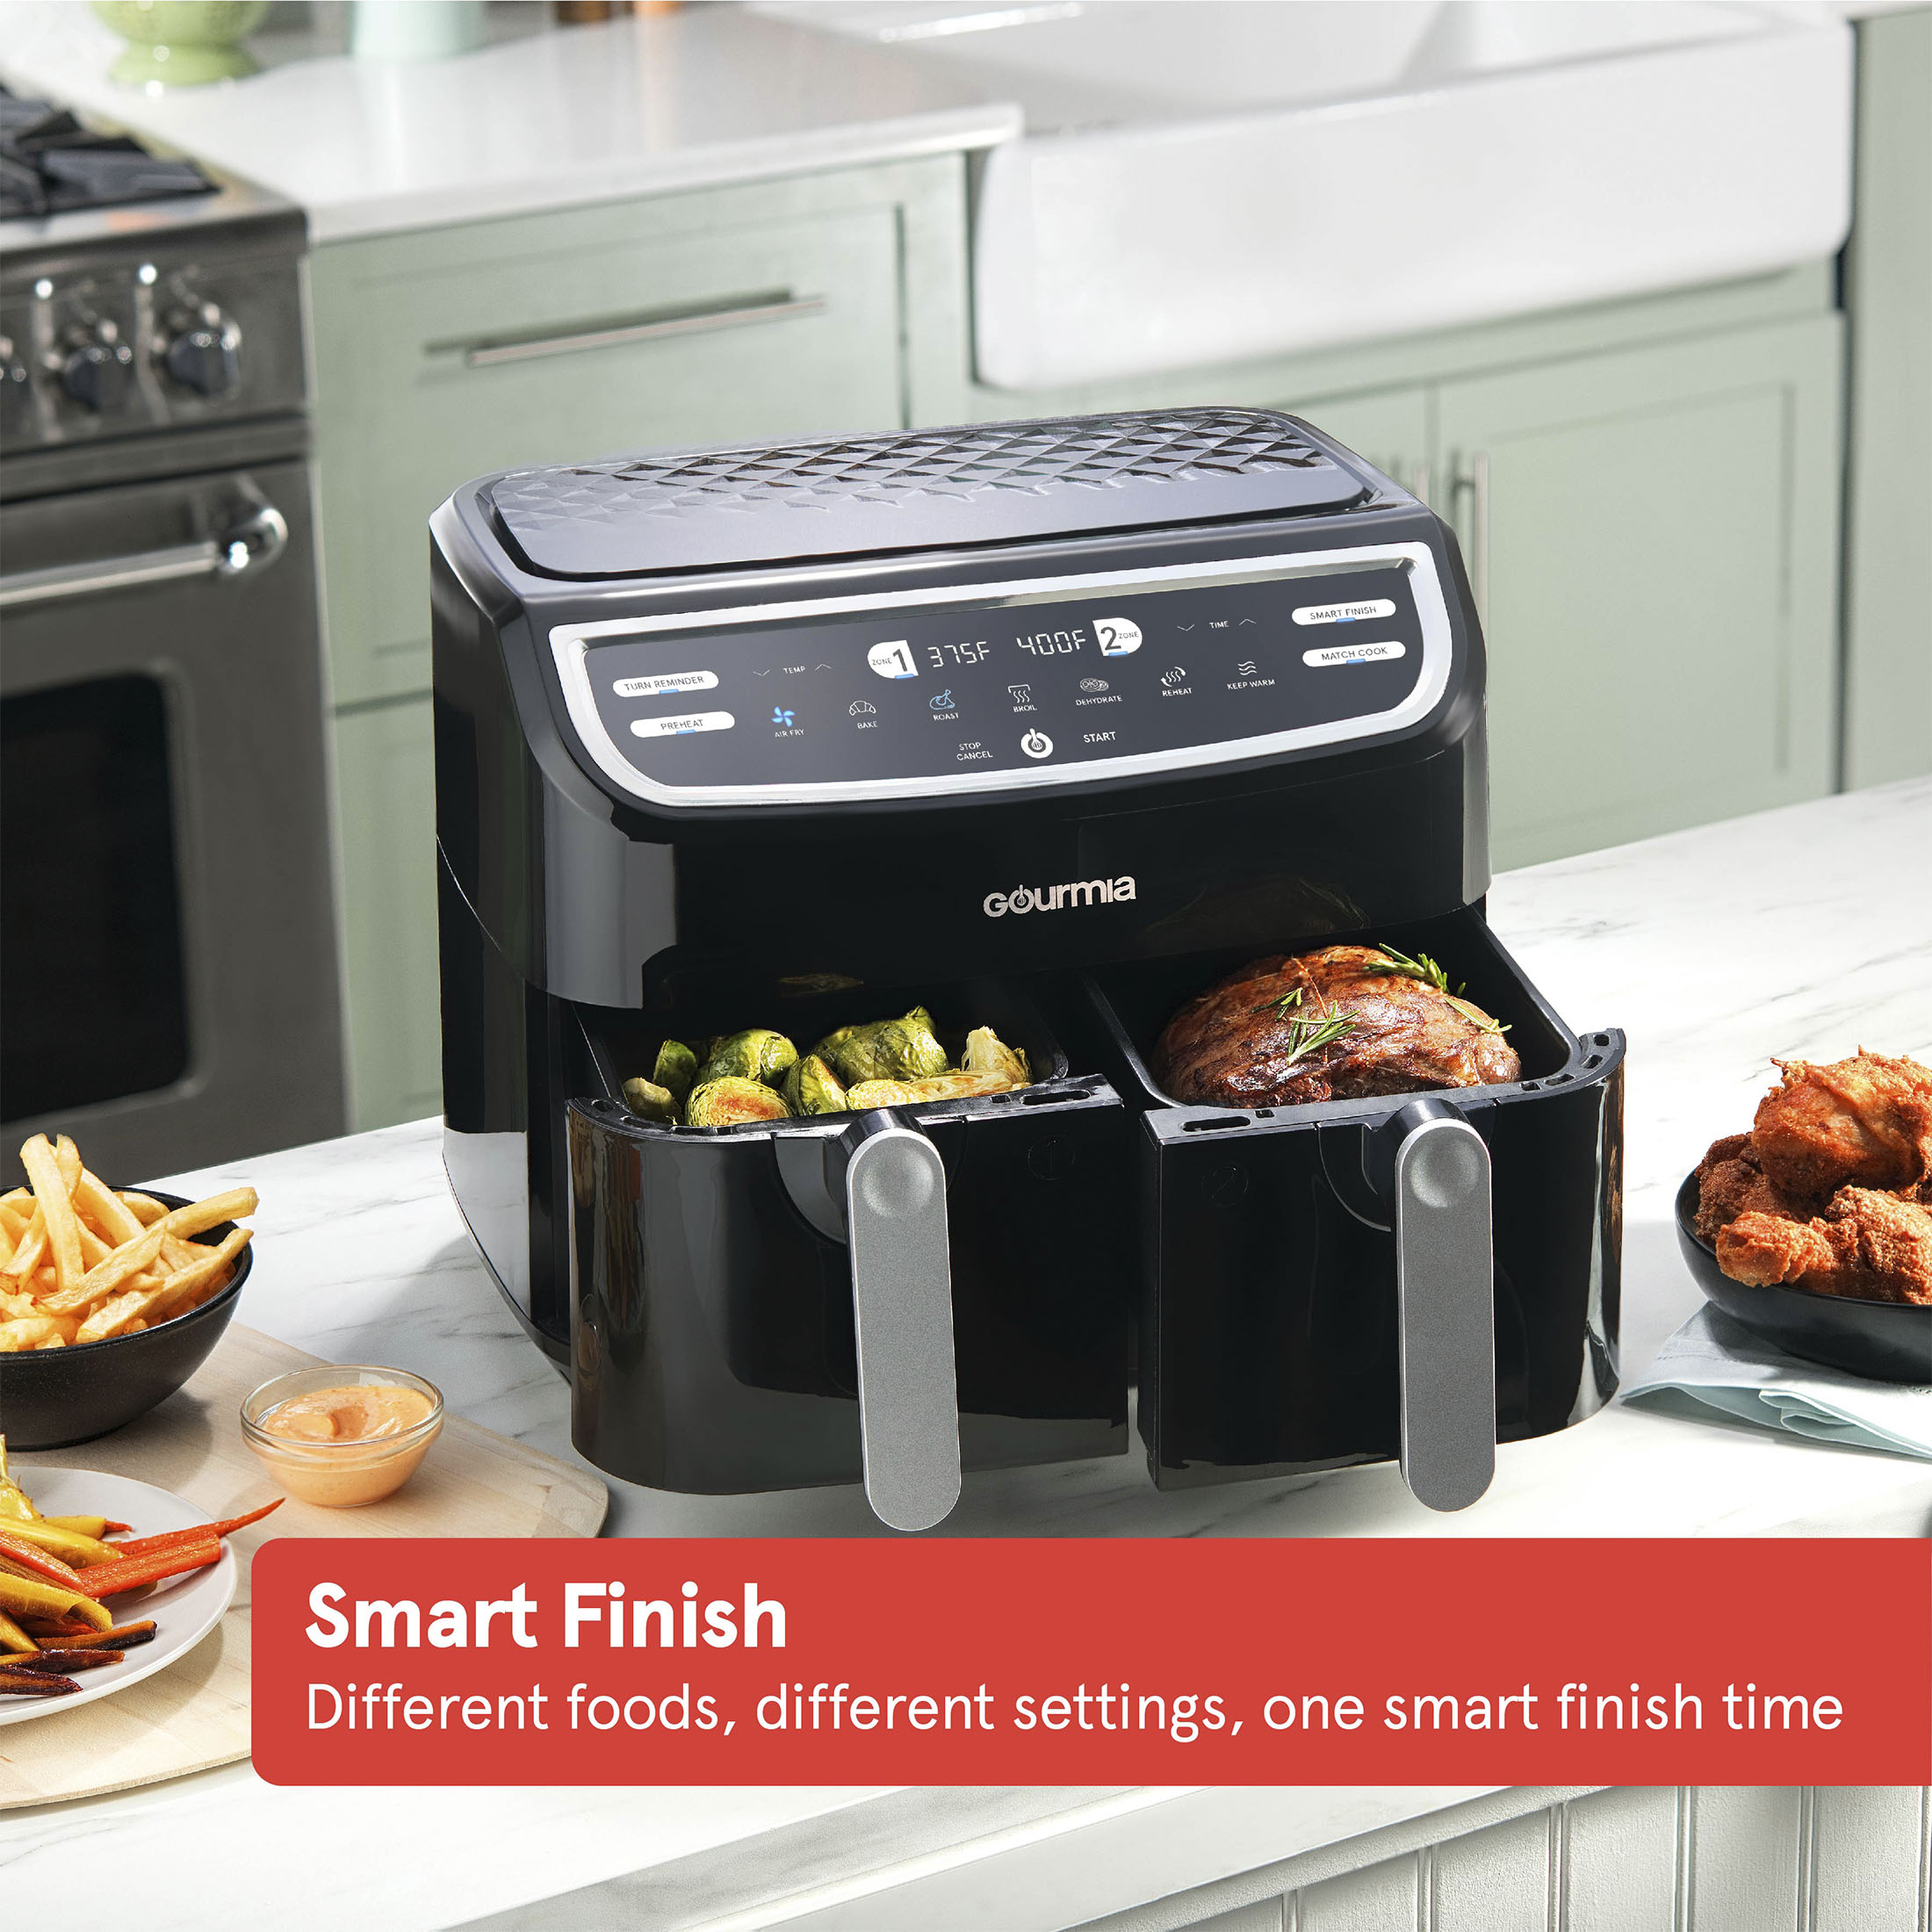 Gourmia 9 Qt 7-in-1 Dual Basket Digital Air Fryer with Smart Finish, BLK, 12.598 H, New - image 4 of 14